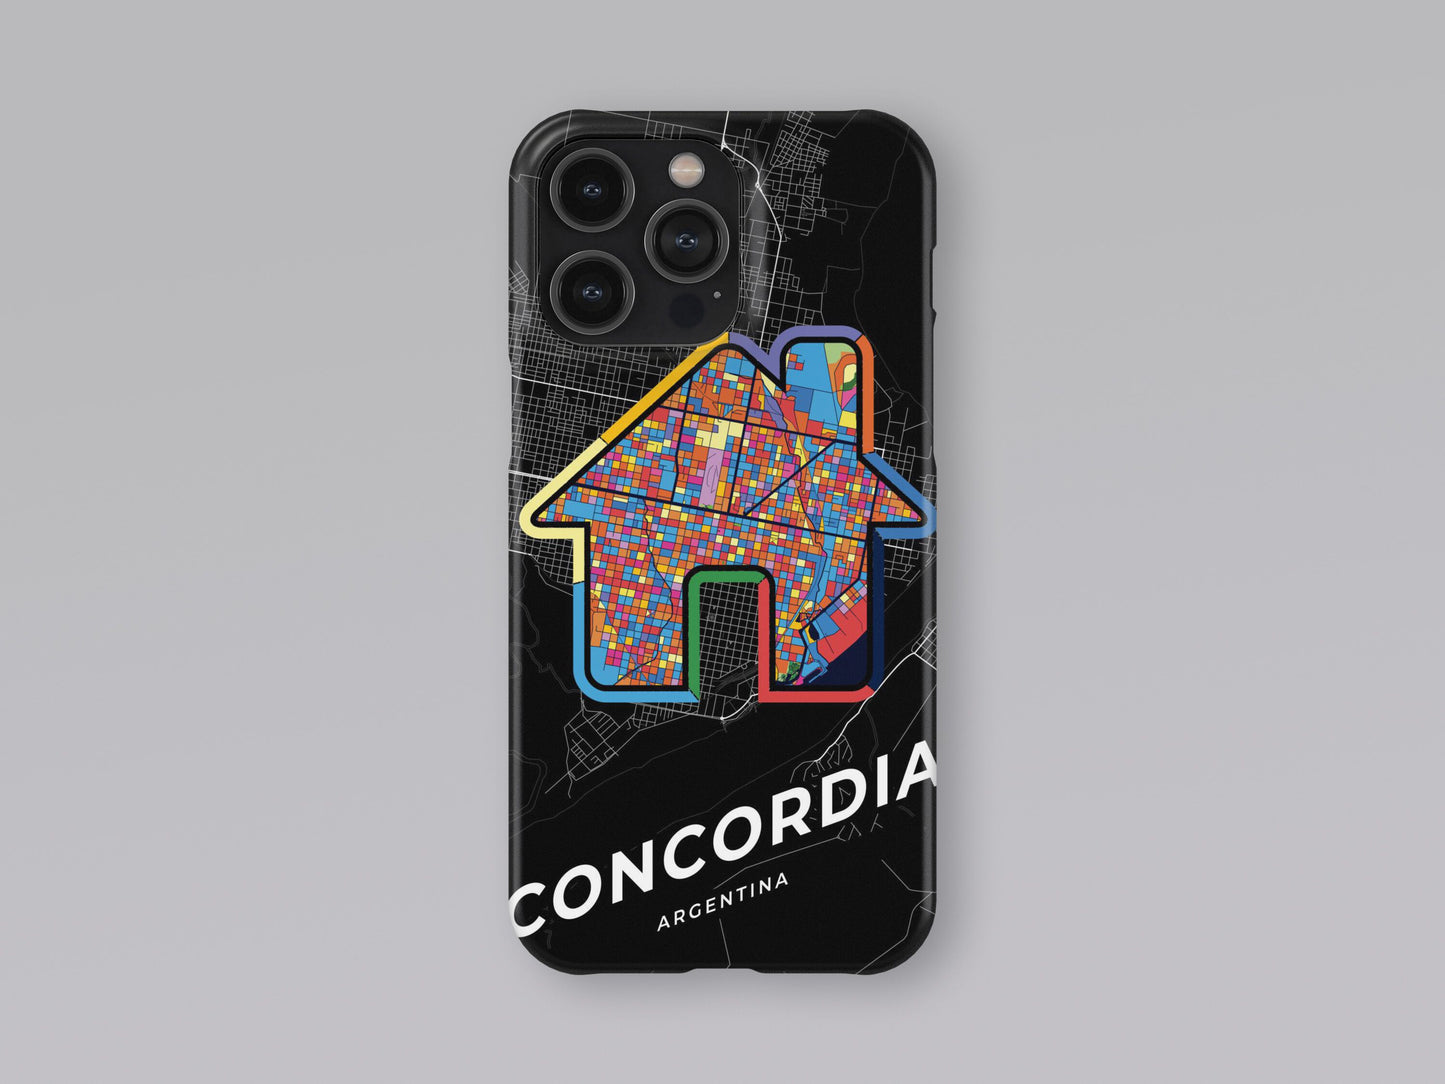 Concordia Argentina slim phone case with colorful icon. Birthday, wedding or housewarming gift. Couple match cases. 3